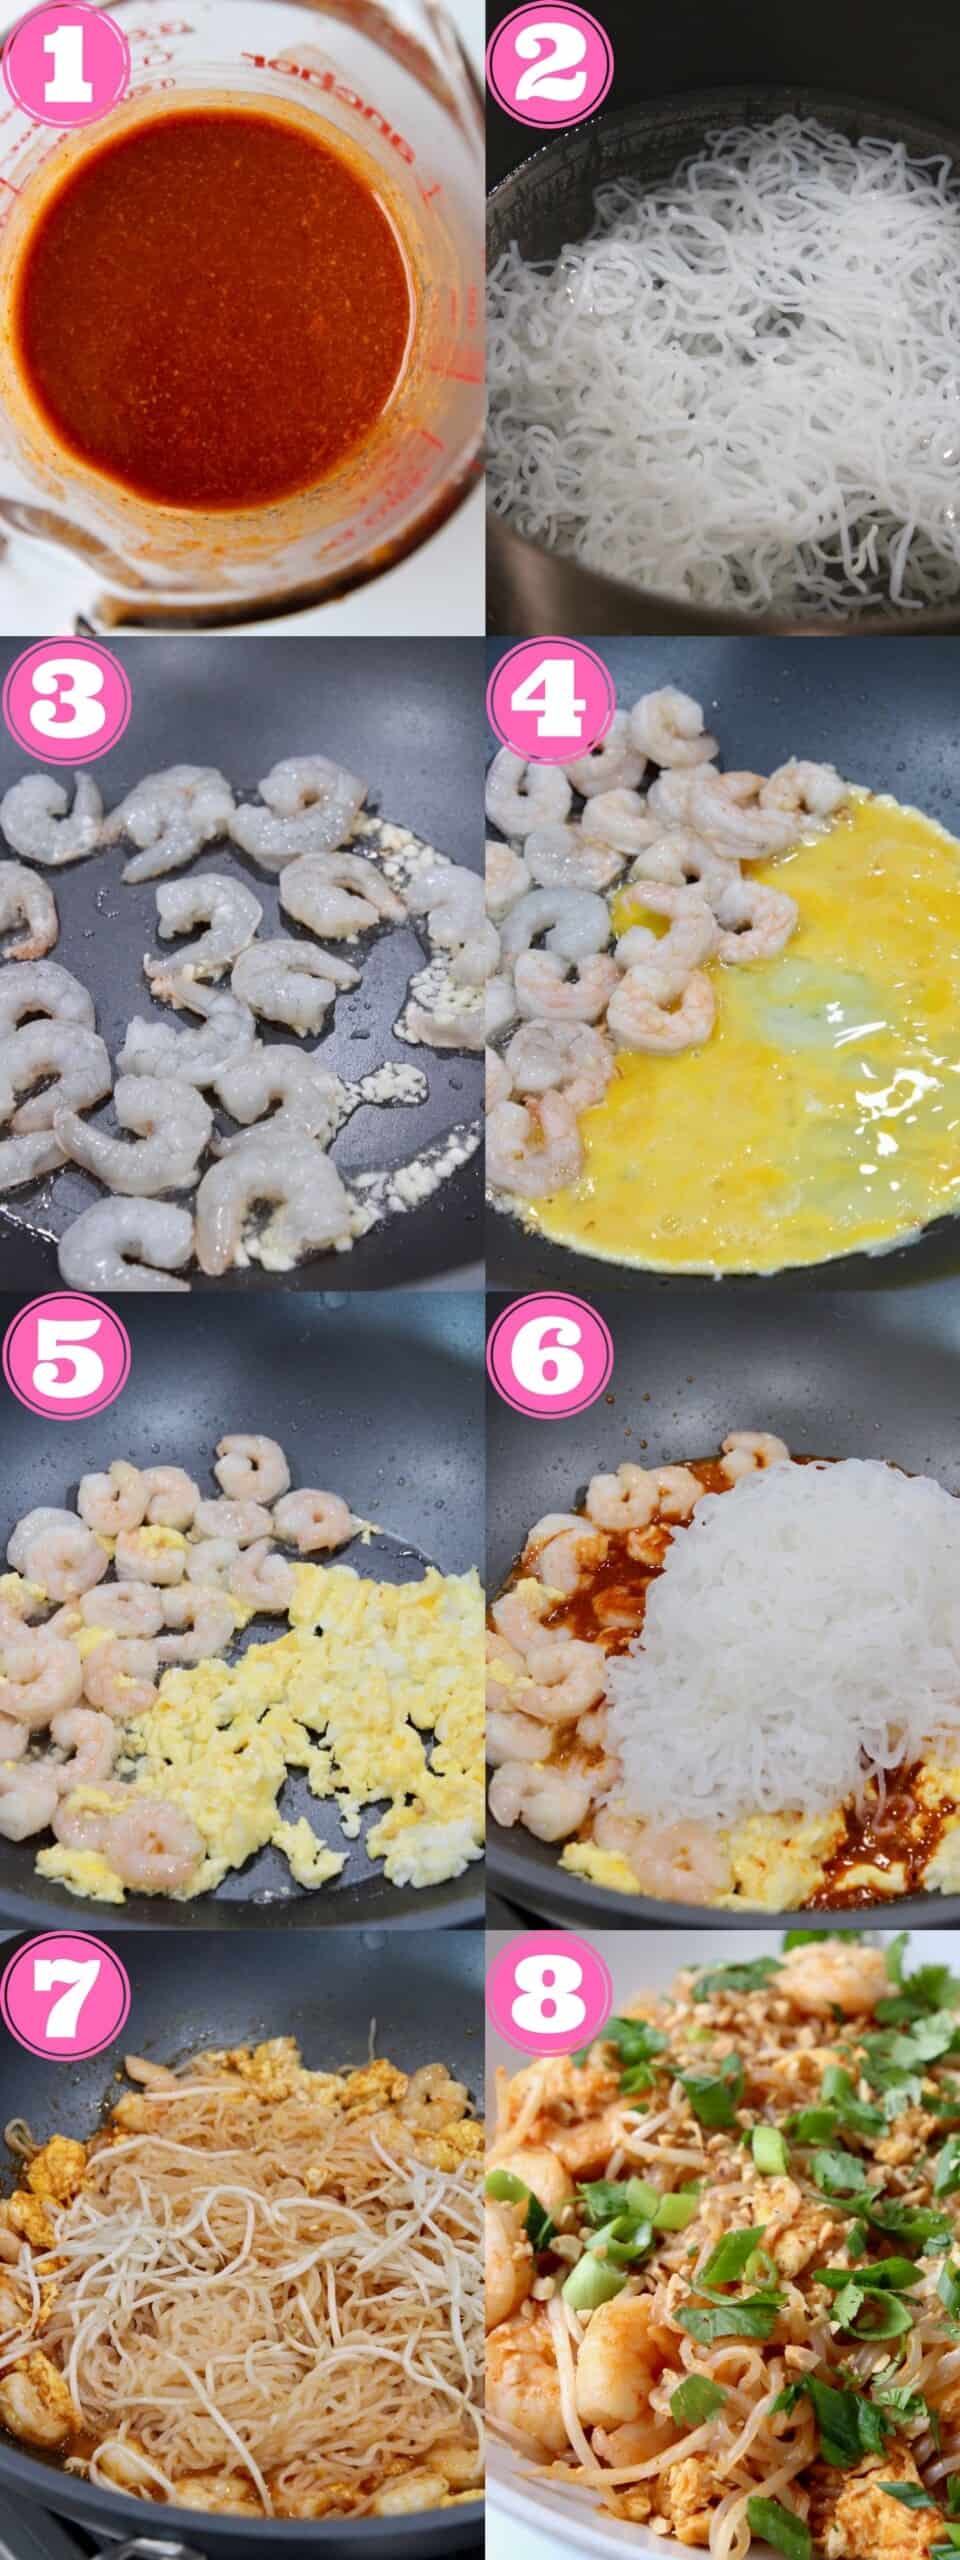 collage of images showing how to make pad thai